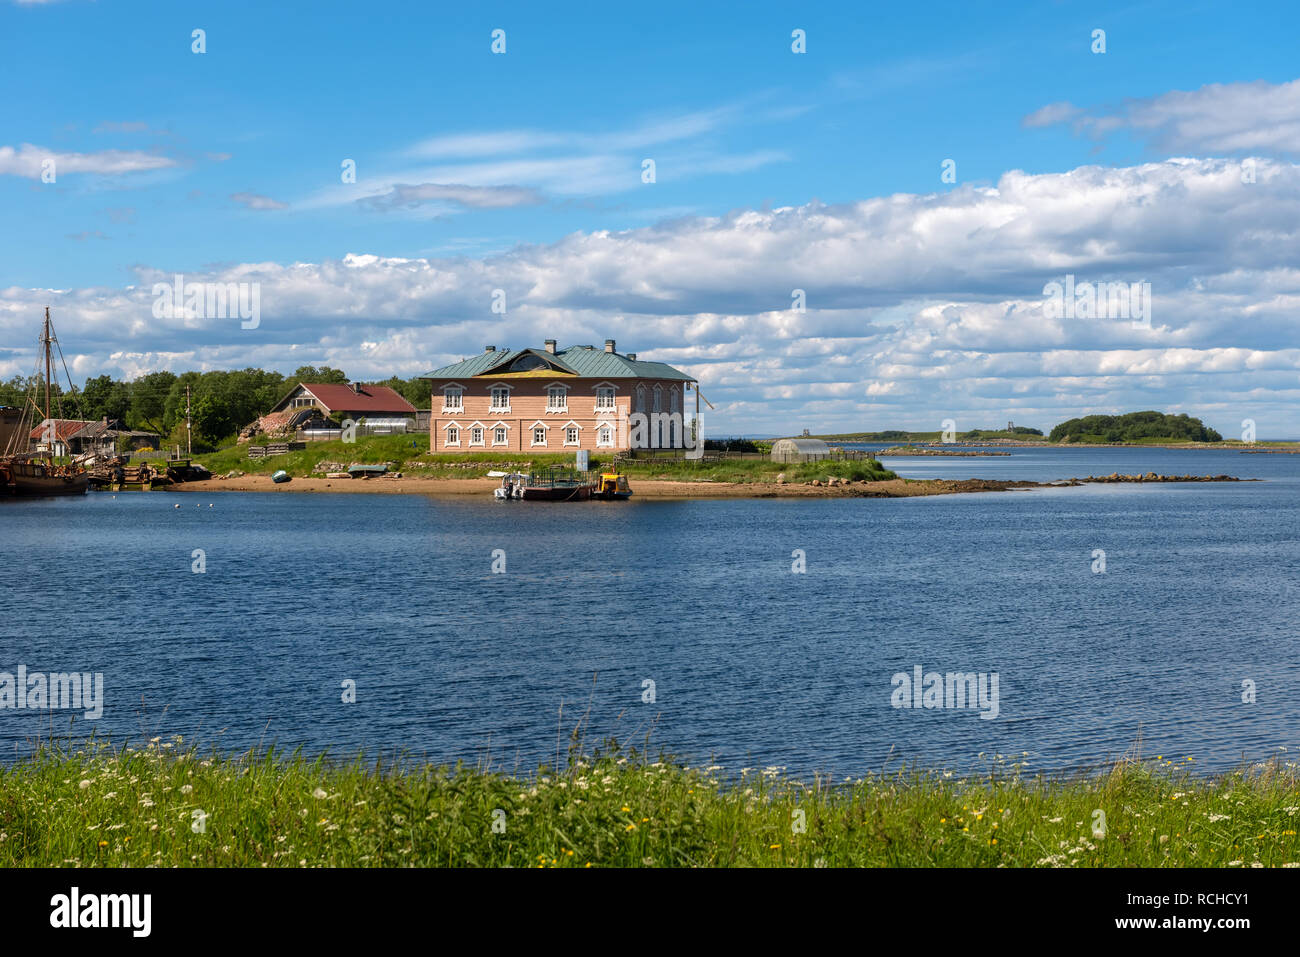 View of the Prosperity Cove on a polar summer day. Solovki Islands, Arkhangelsk region, White Sea. Stock Photo